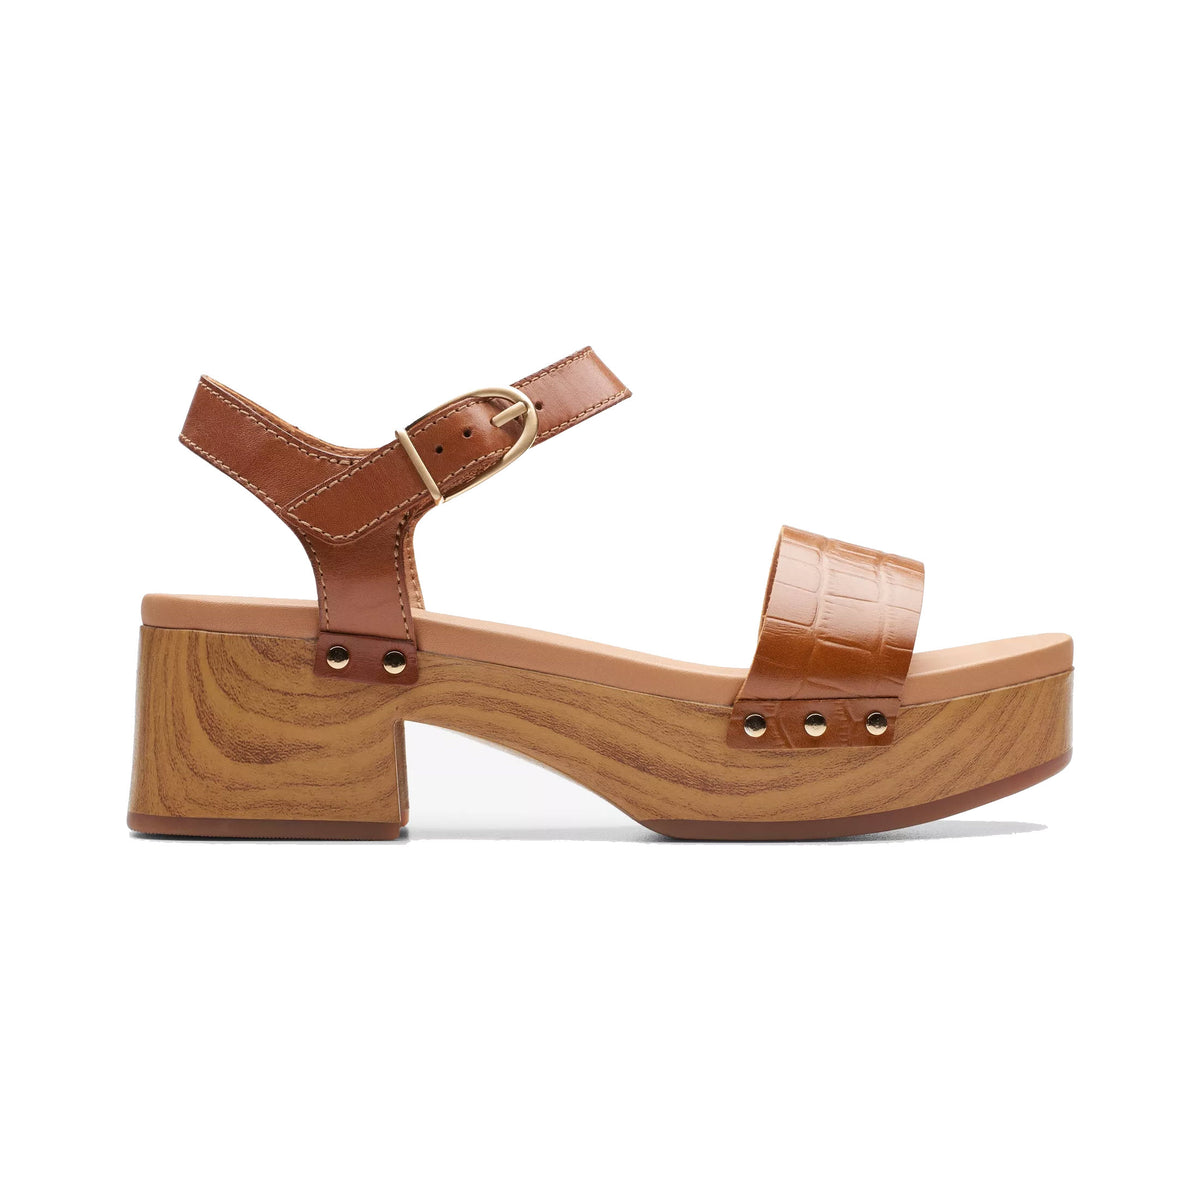 A Clarks Sivanne Walk Tan sandal with a thick wooden platform sole and a flared heel, featuring a strap around the ankle, photographed against a white background.